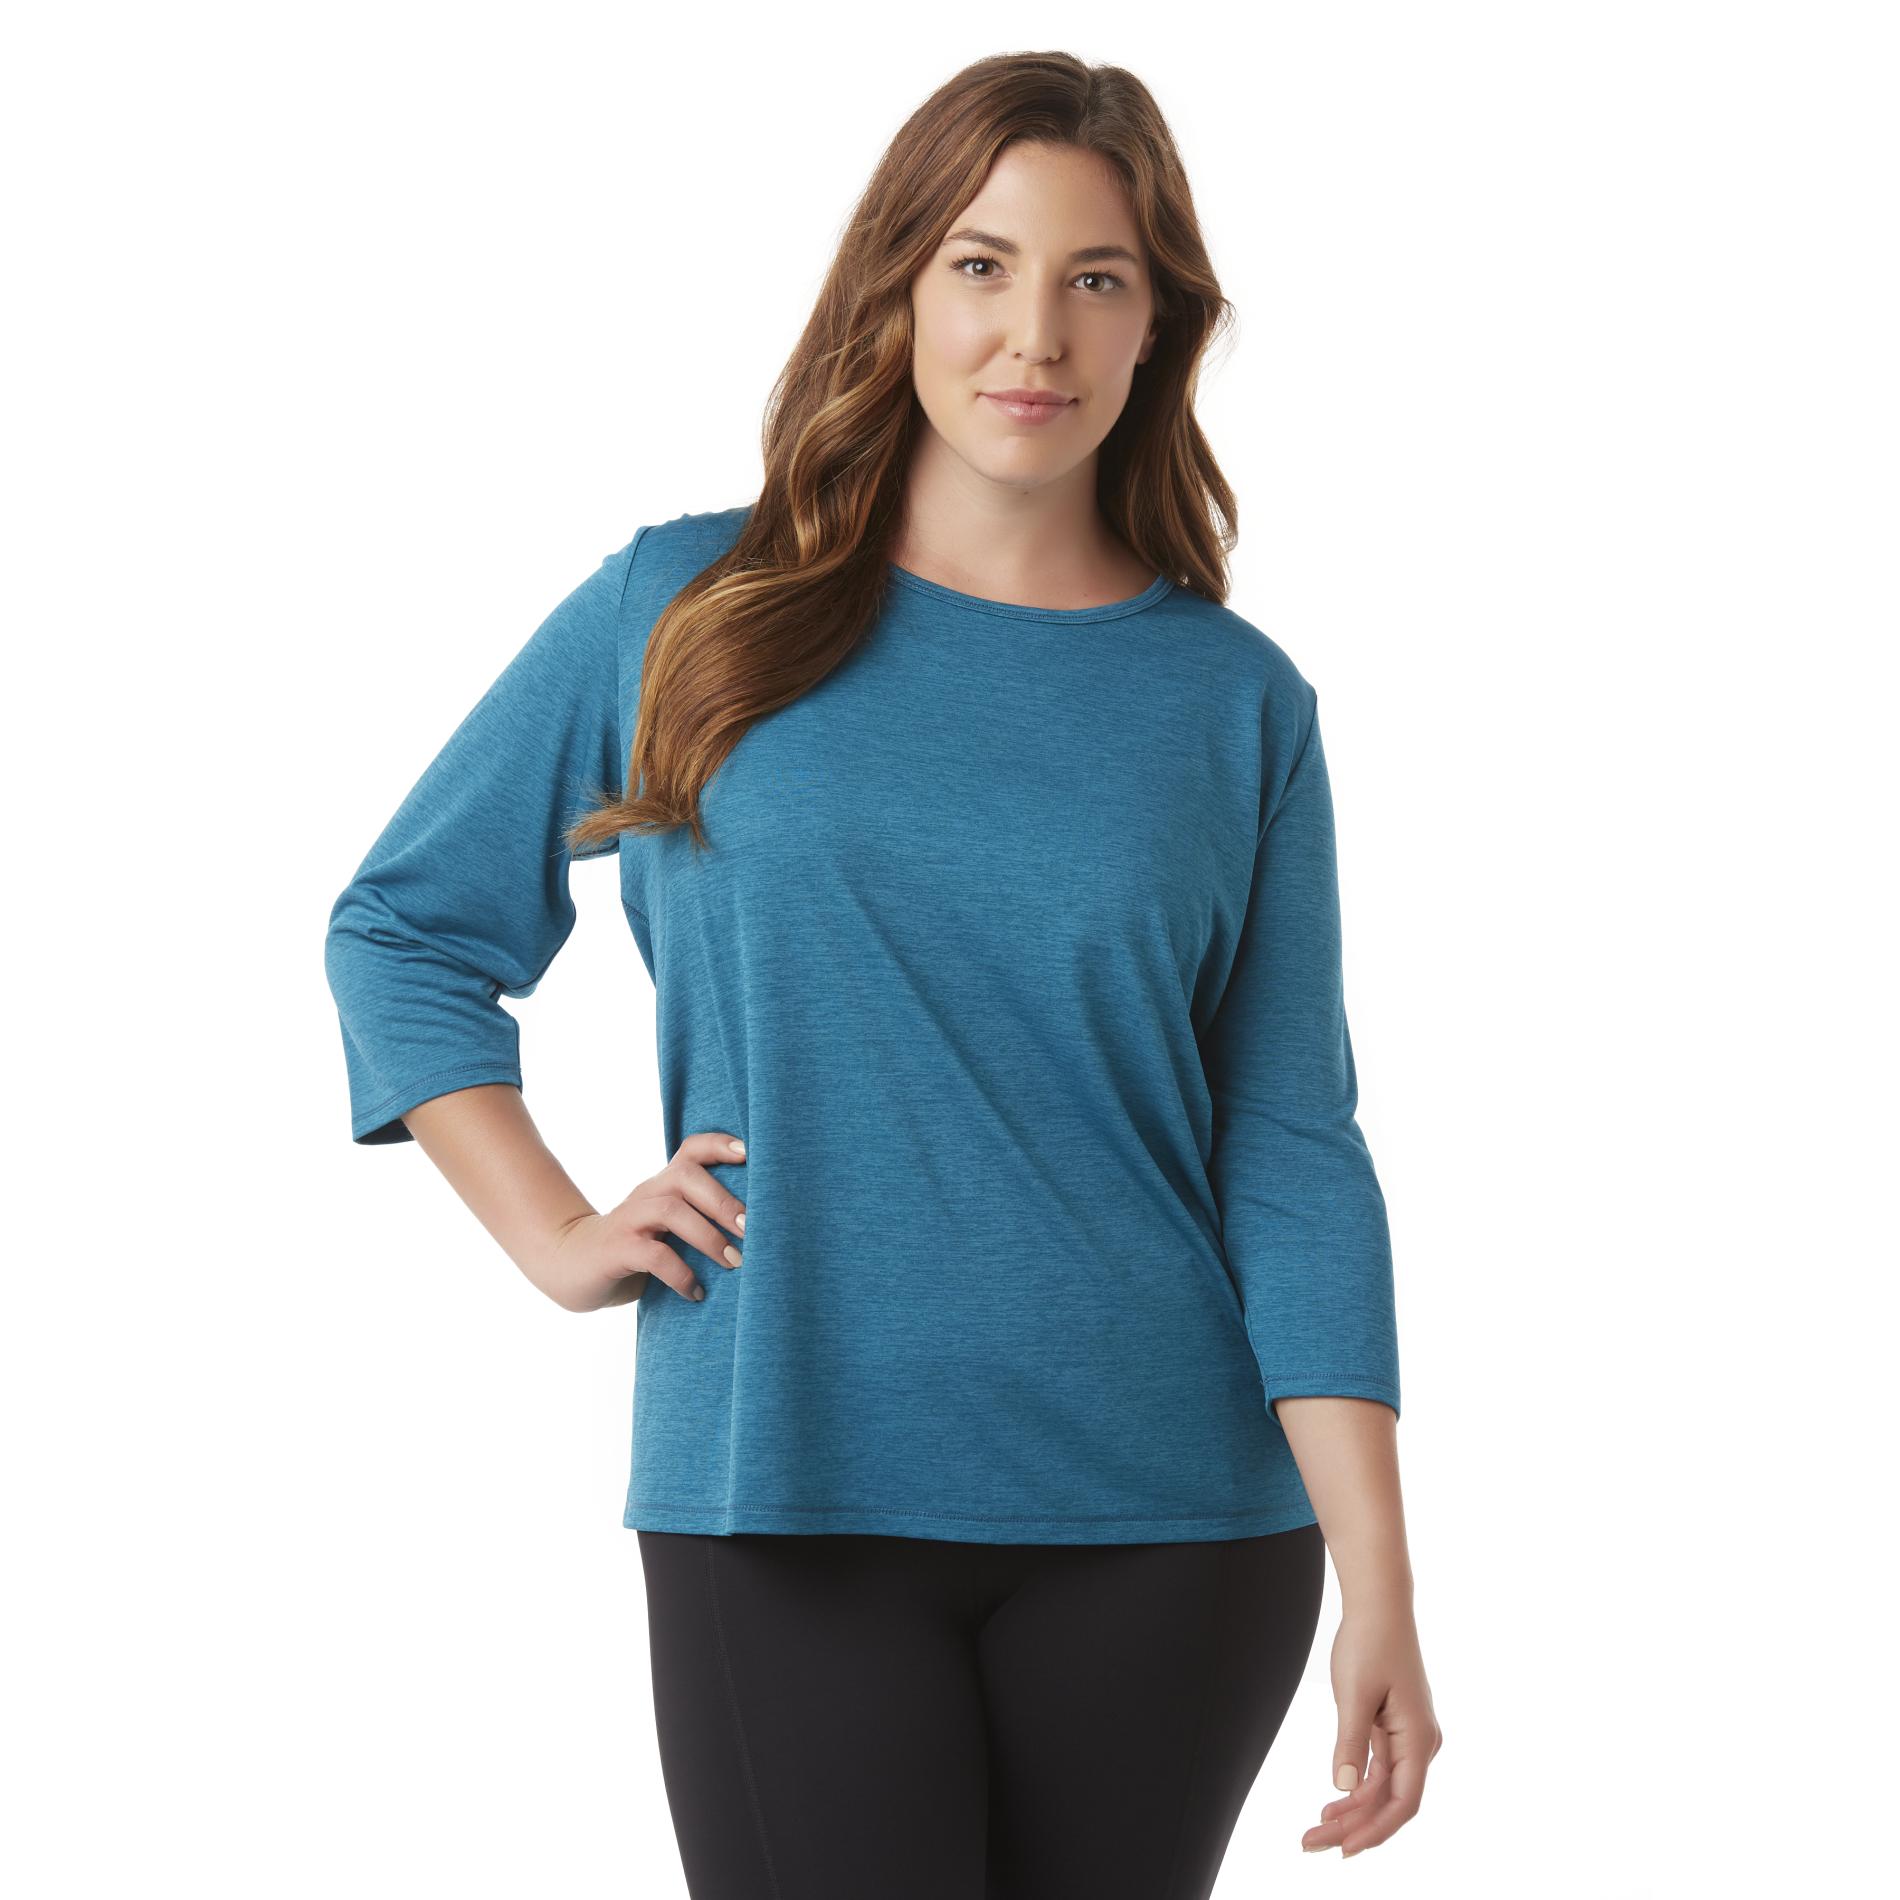 Simply Emma Women's Plus Performance Shirt - Space Dyed